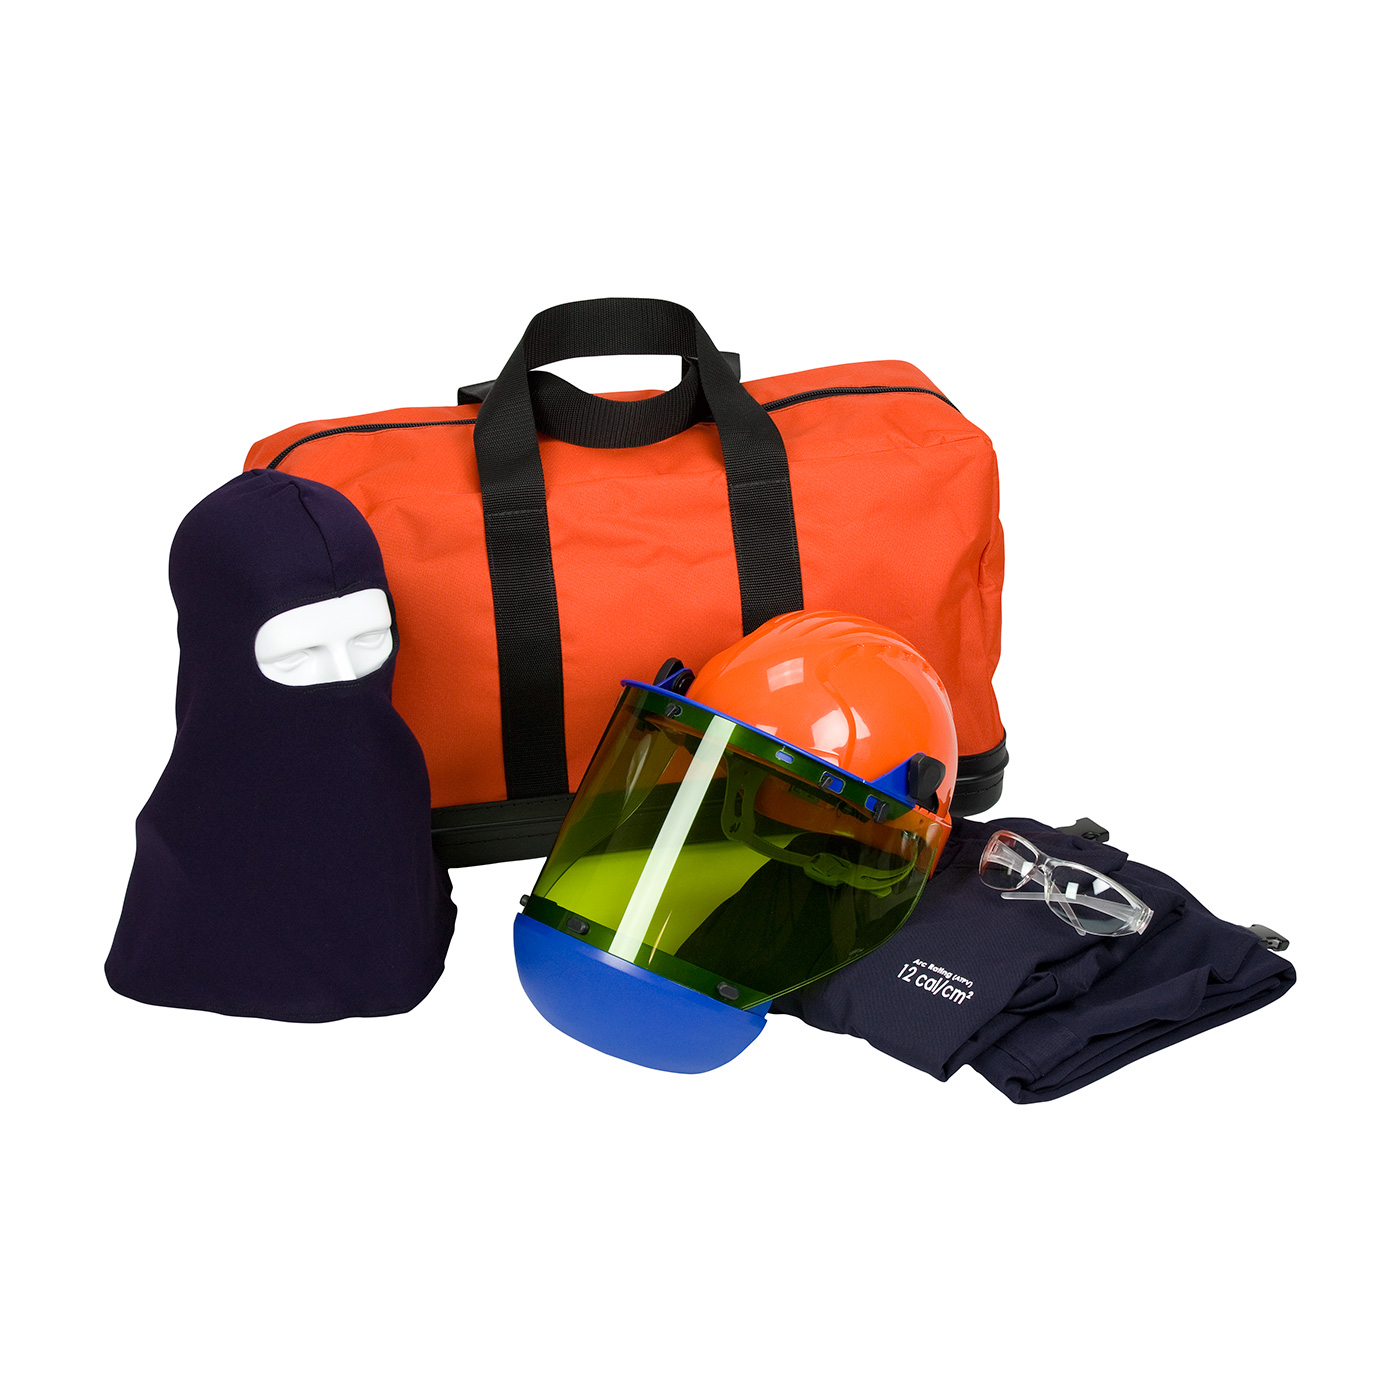 9150-52804 PIP® PPE 2 Arc Flash Kit - 12 Cal/cm2 Contains jacket, overall, hard hat with arc shield, balaclava, safety glasses and carry bag